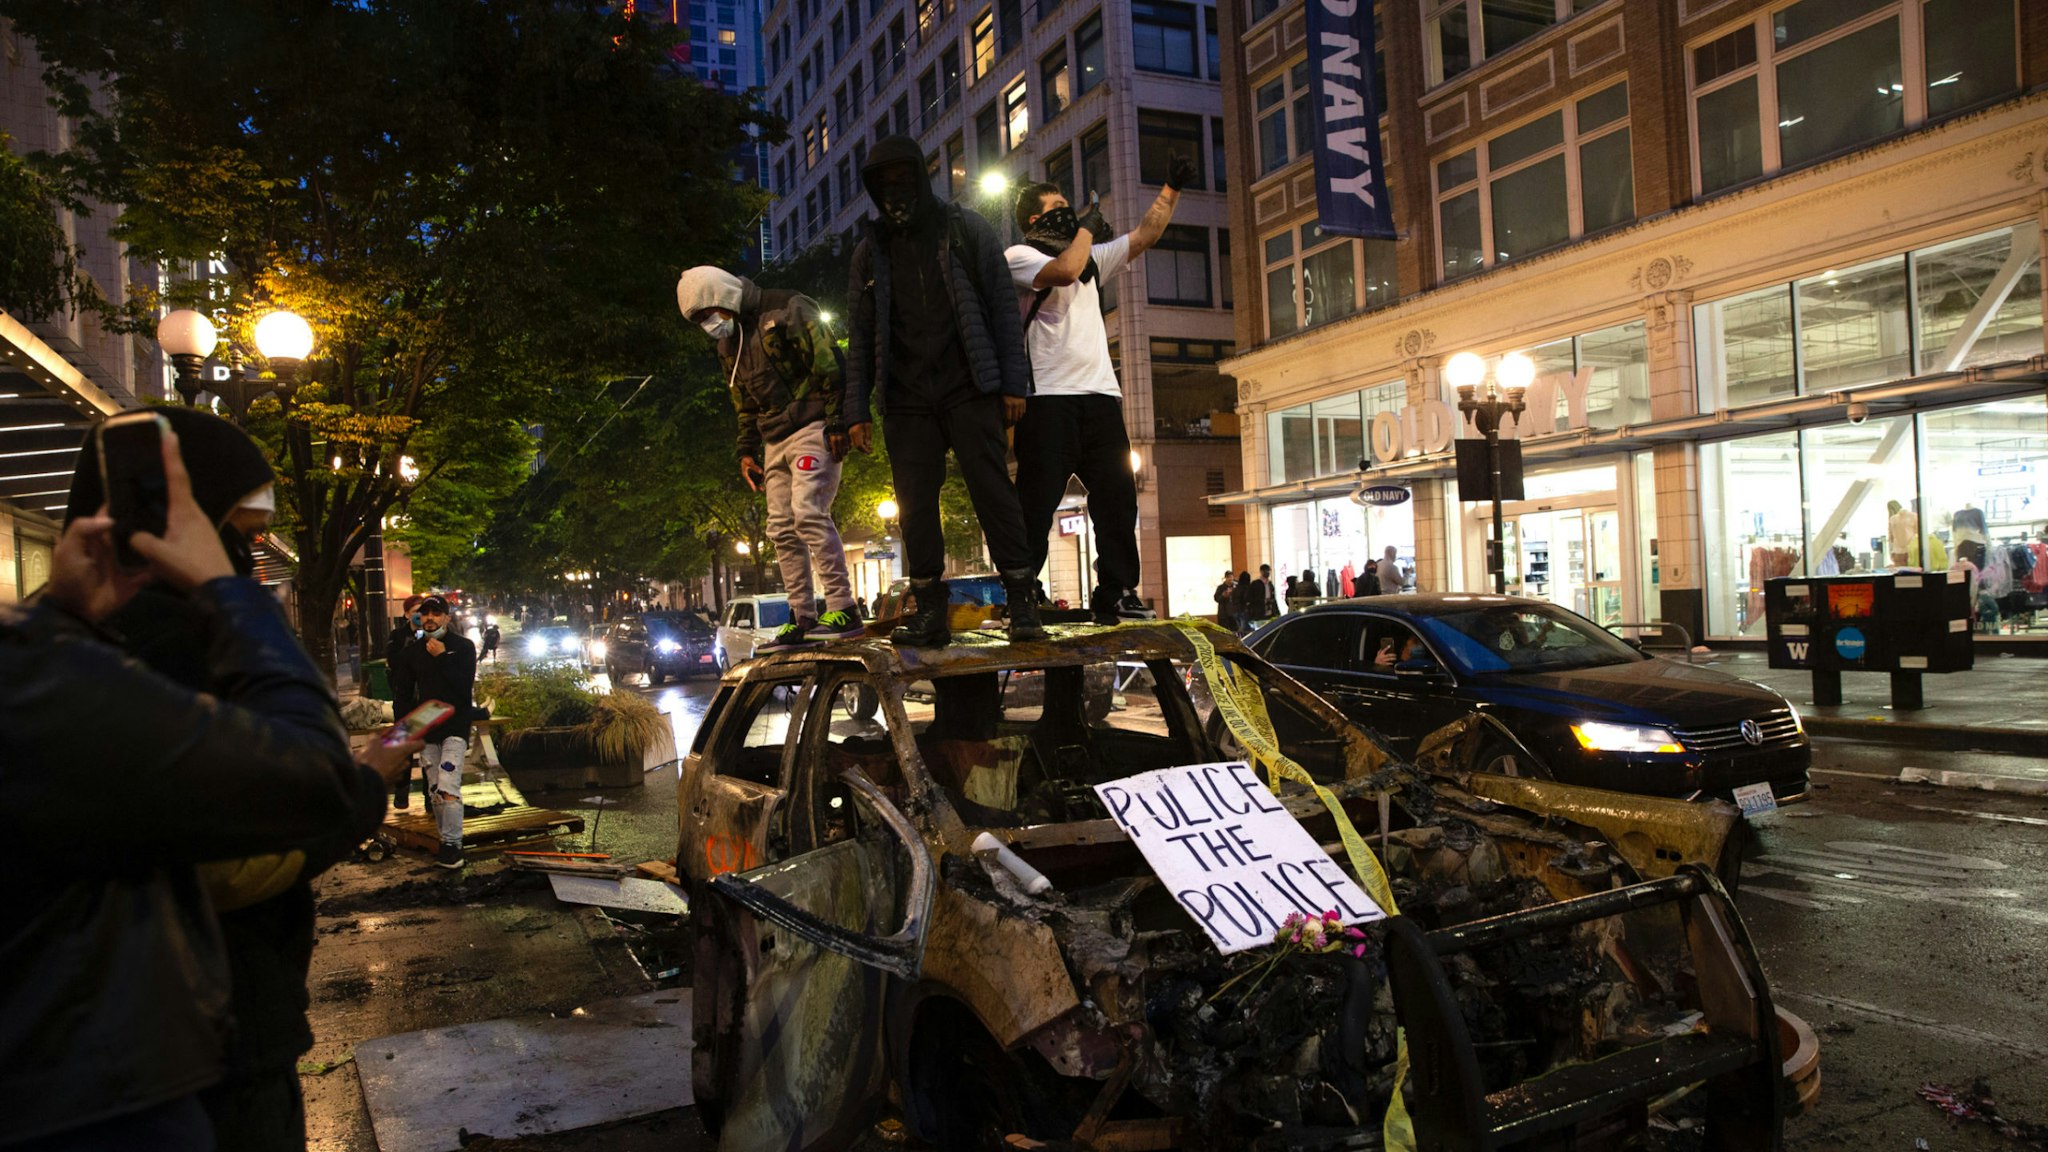 Protesters riot in the streets following a peaceful rally expressing outrage over the death of George Floyd on May 30, 2020 in Seattle, Washington.